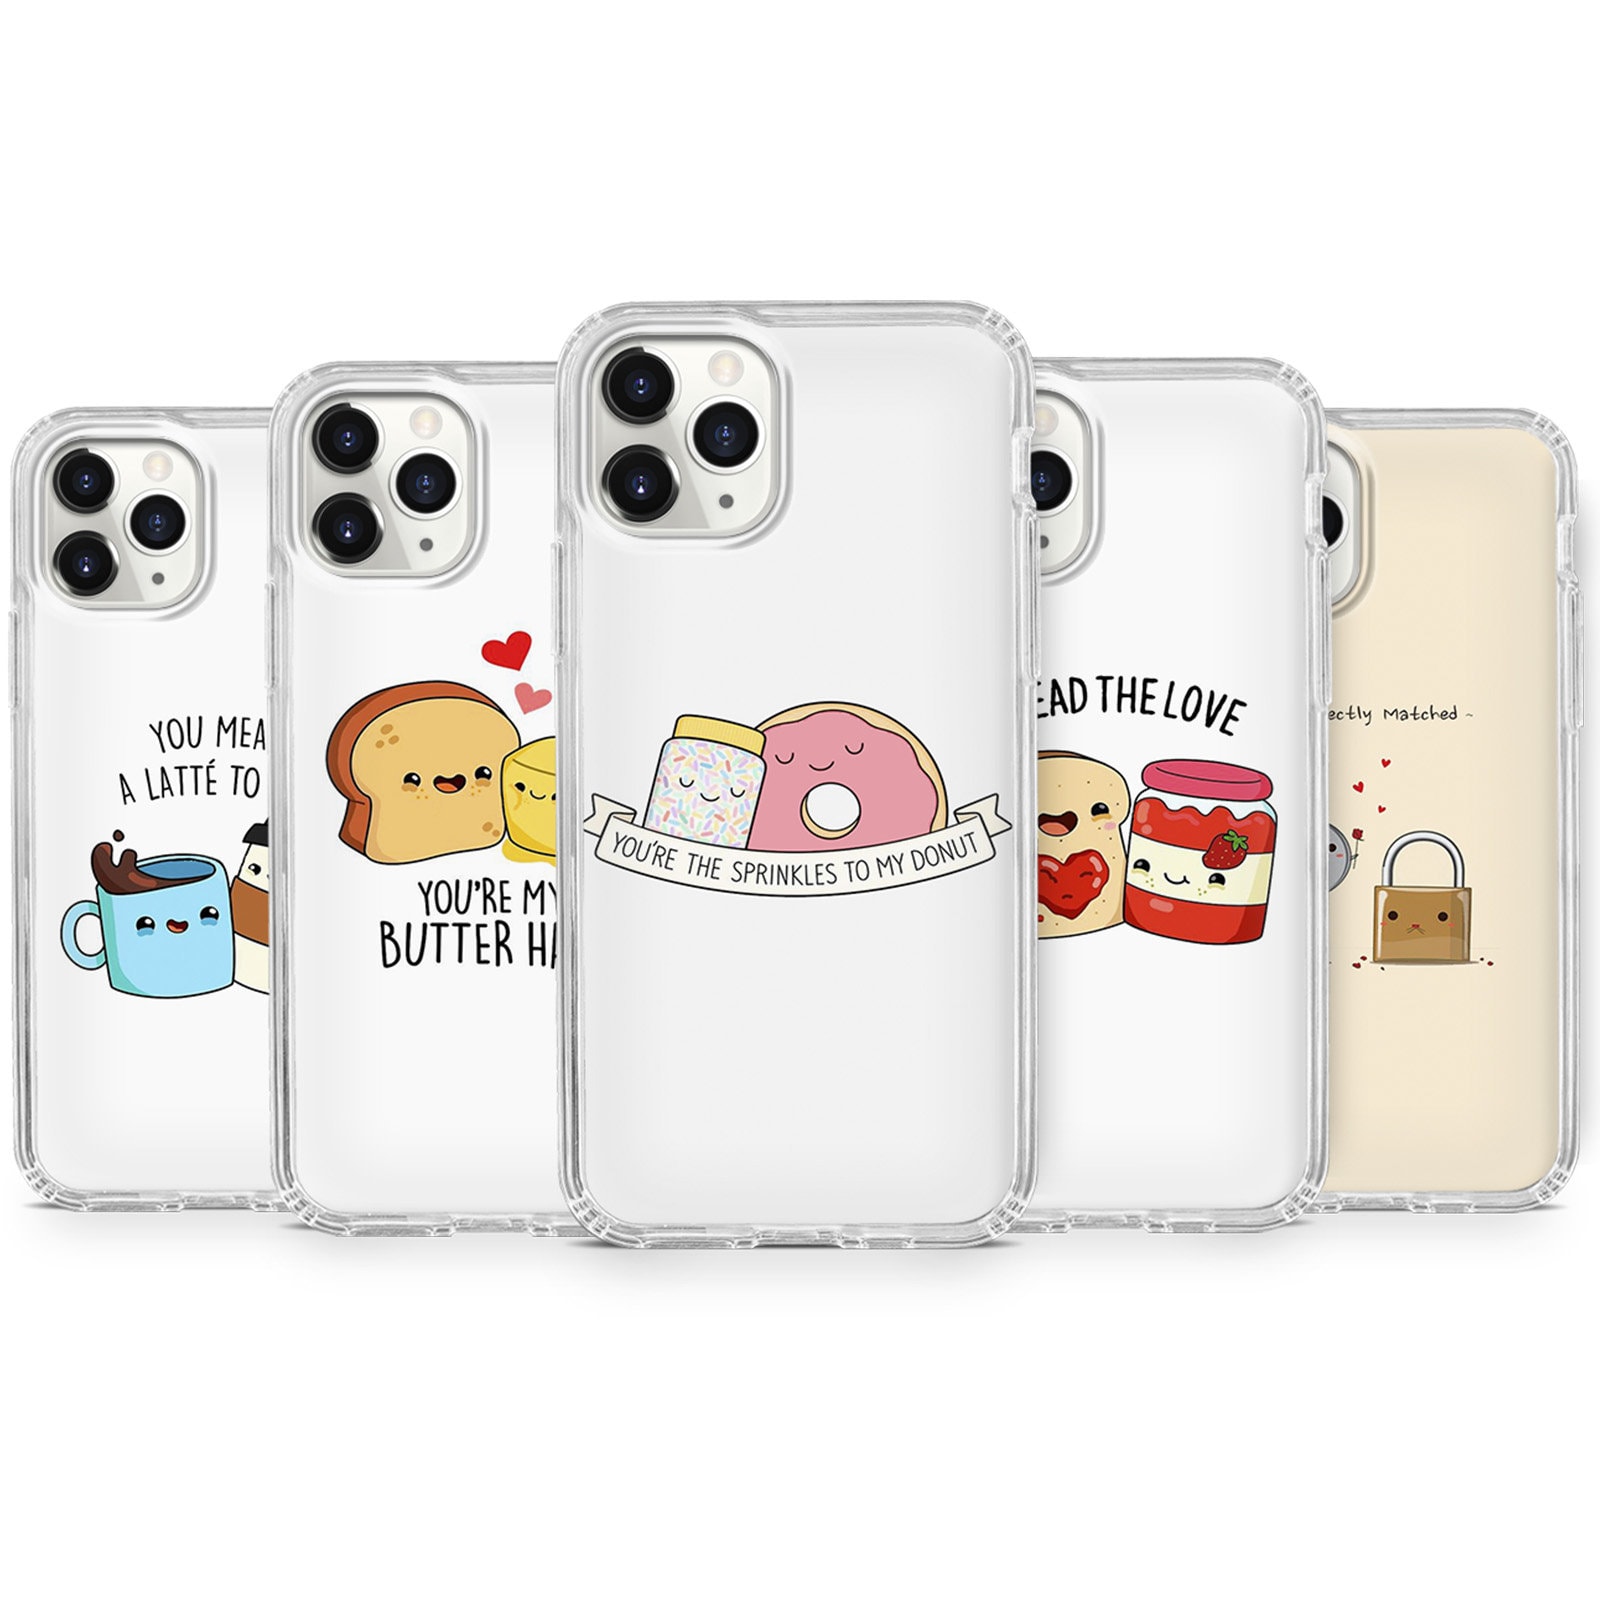 X Valentine Couple Paired Cute Phone Cases For iPhone 12 Huawei P20,P30 a122 12 pro 11 XS,XR,SE 2020,11 & Samsung S10,A40,A50,51 7,8+